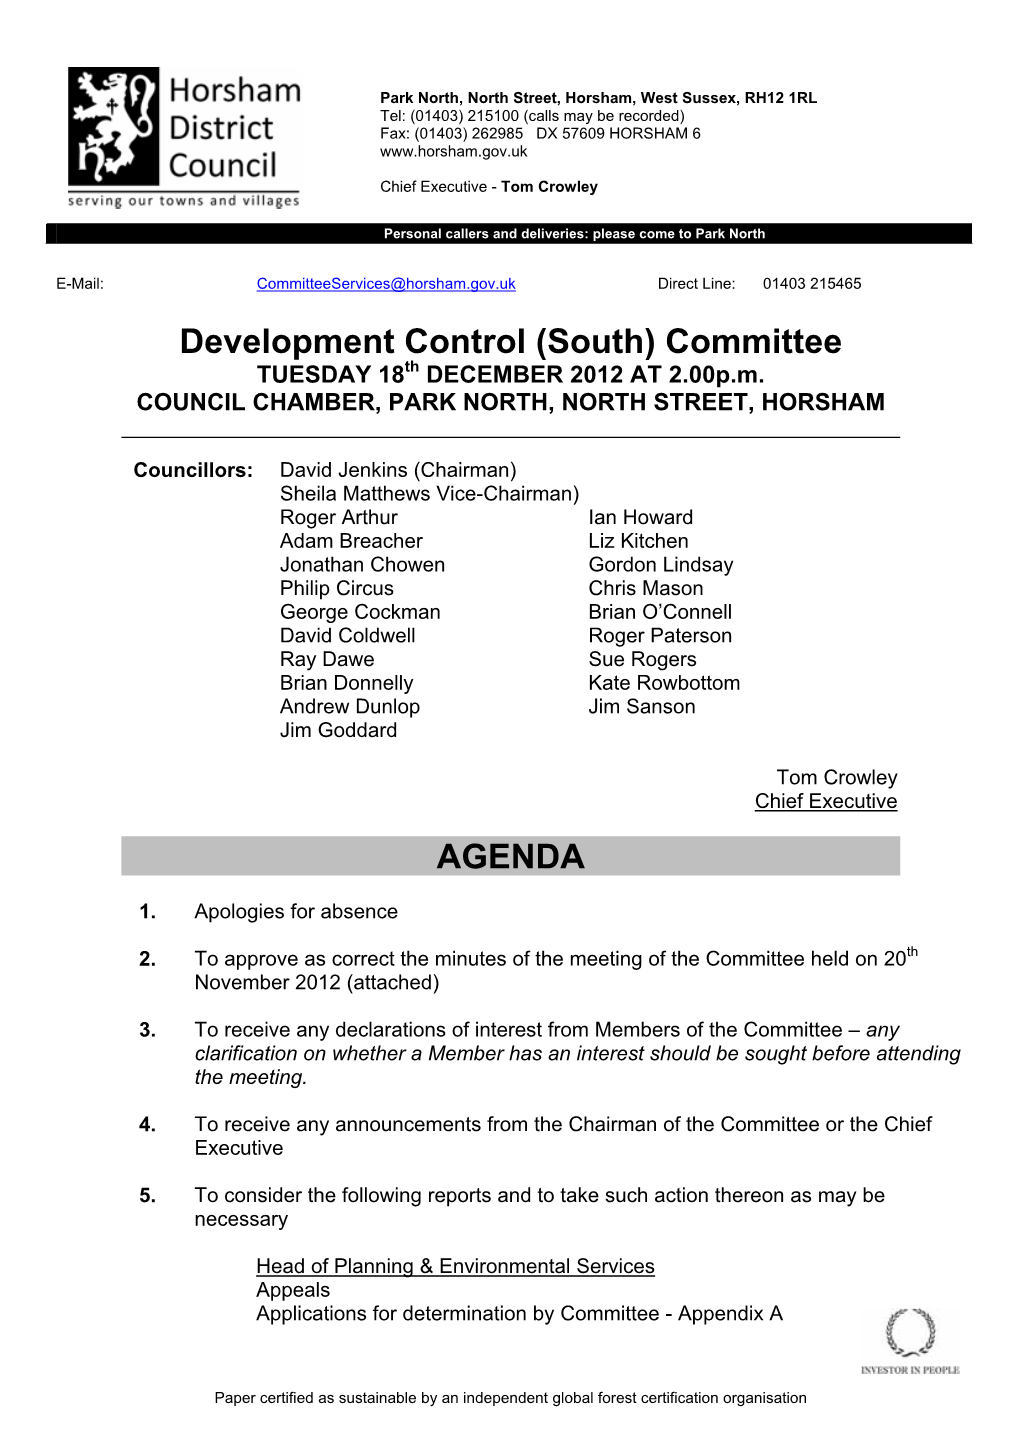 Development Control (South) Committee TUESDAY 18Th DECEMBER 2012 at 2.00P.M